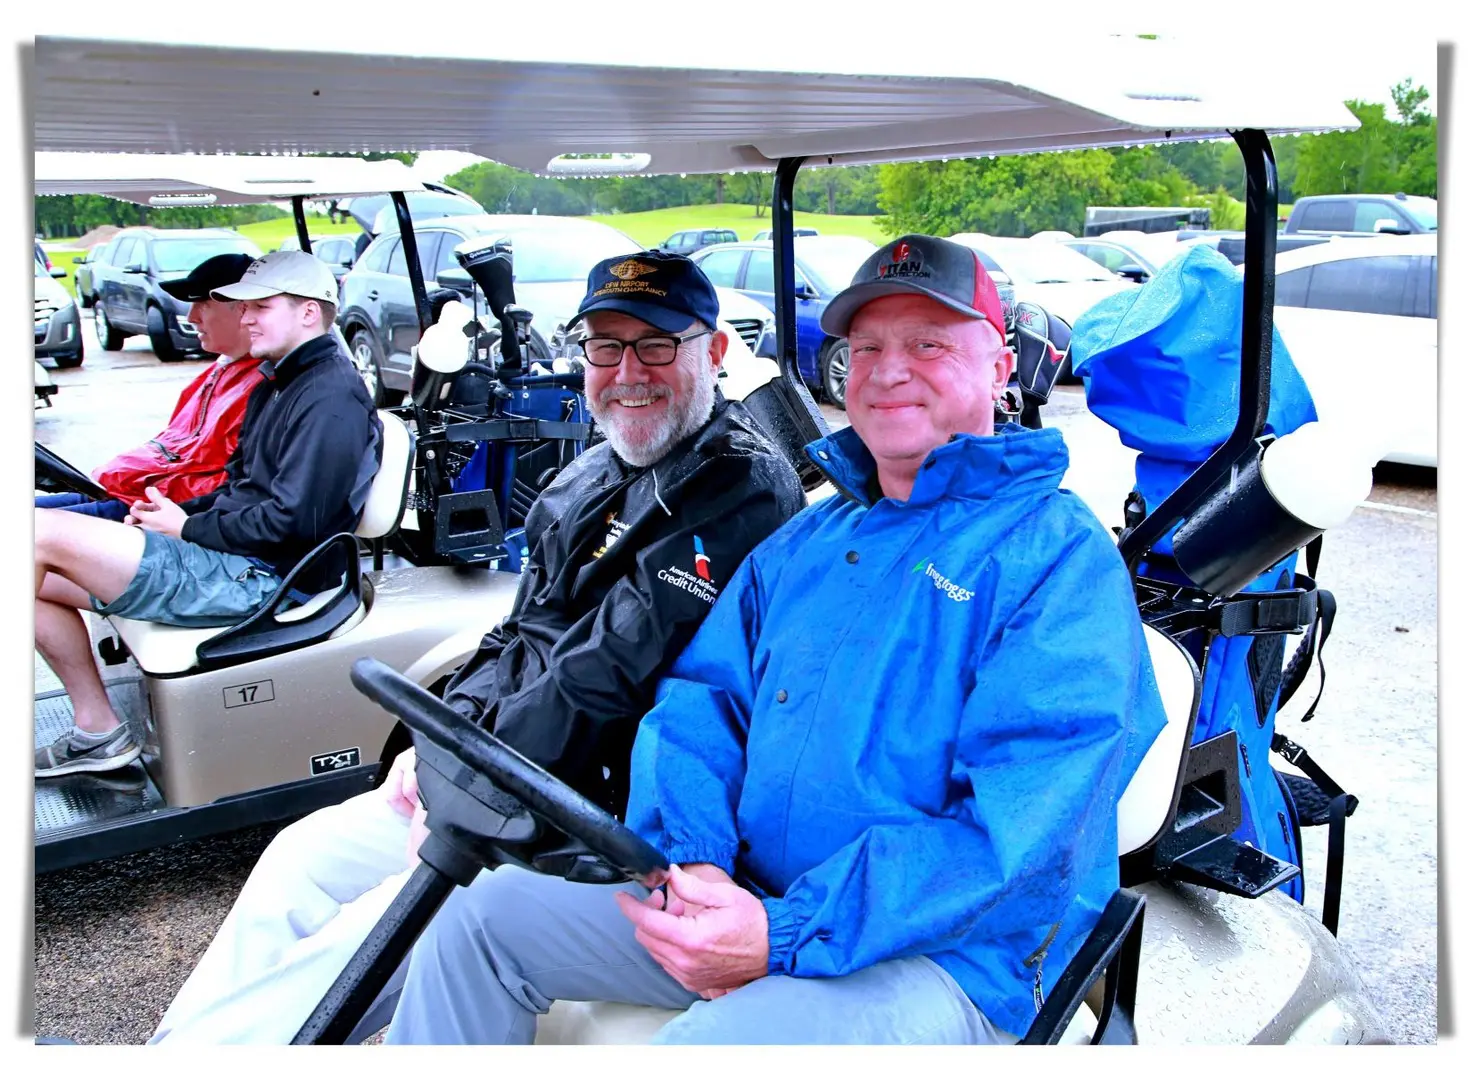 Two men sitting in a golf cart on a rainy day.